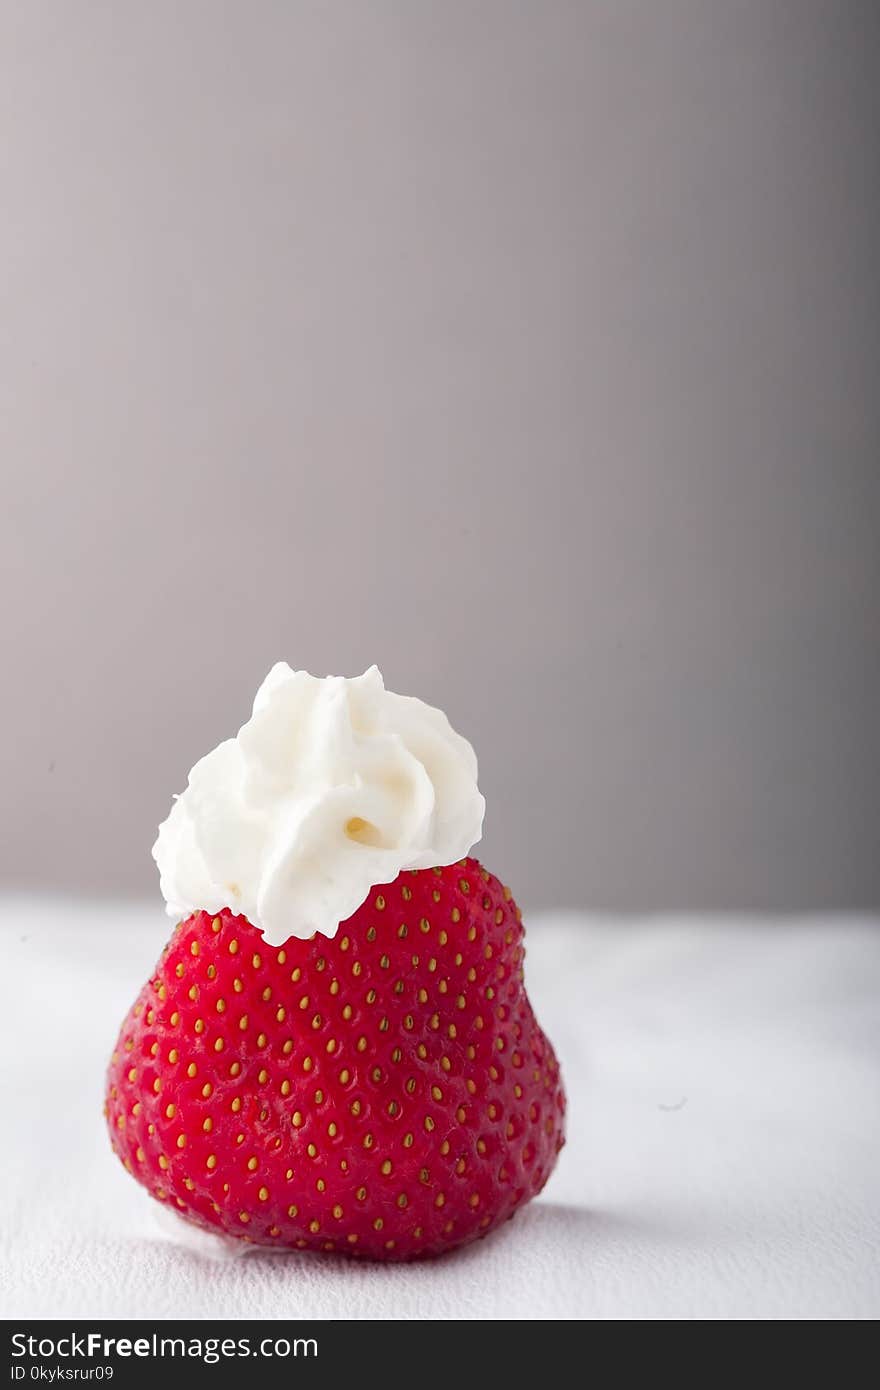 Single strawberry with whipped cream on a white grey background. Vertical image. Copy space